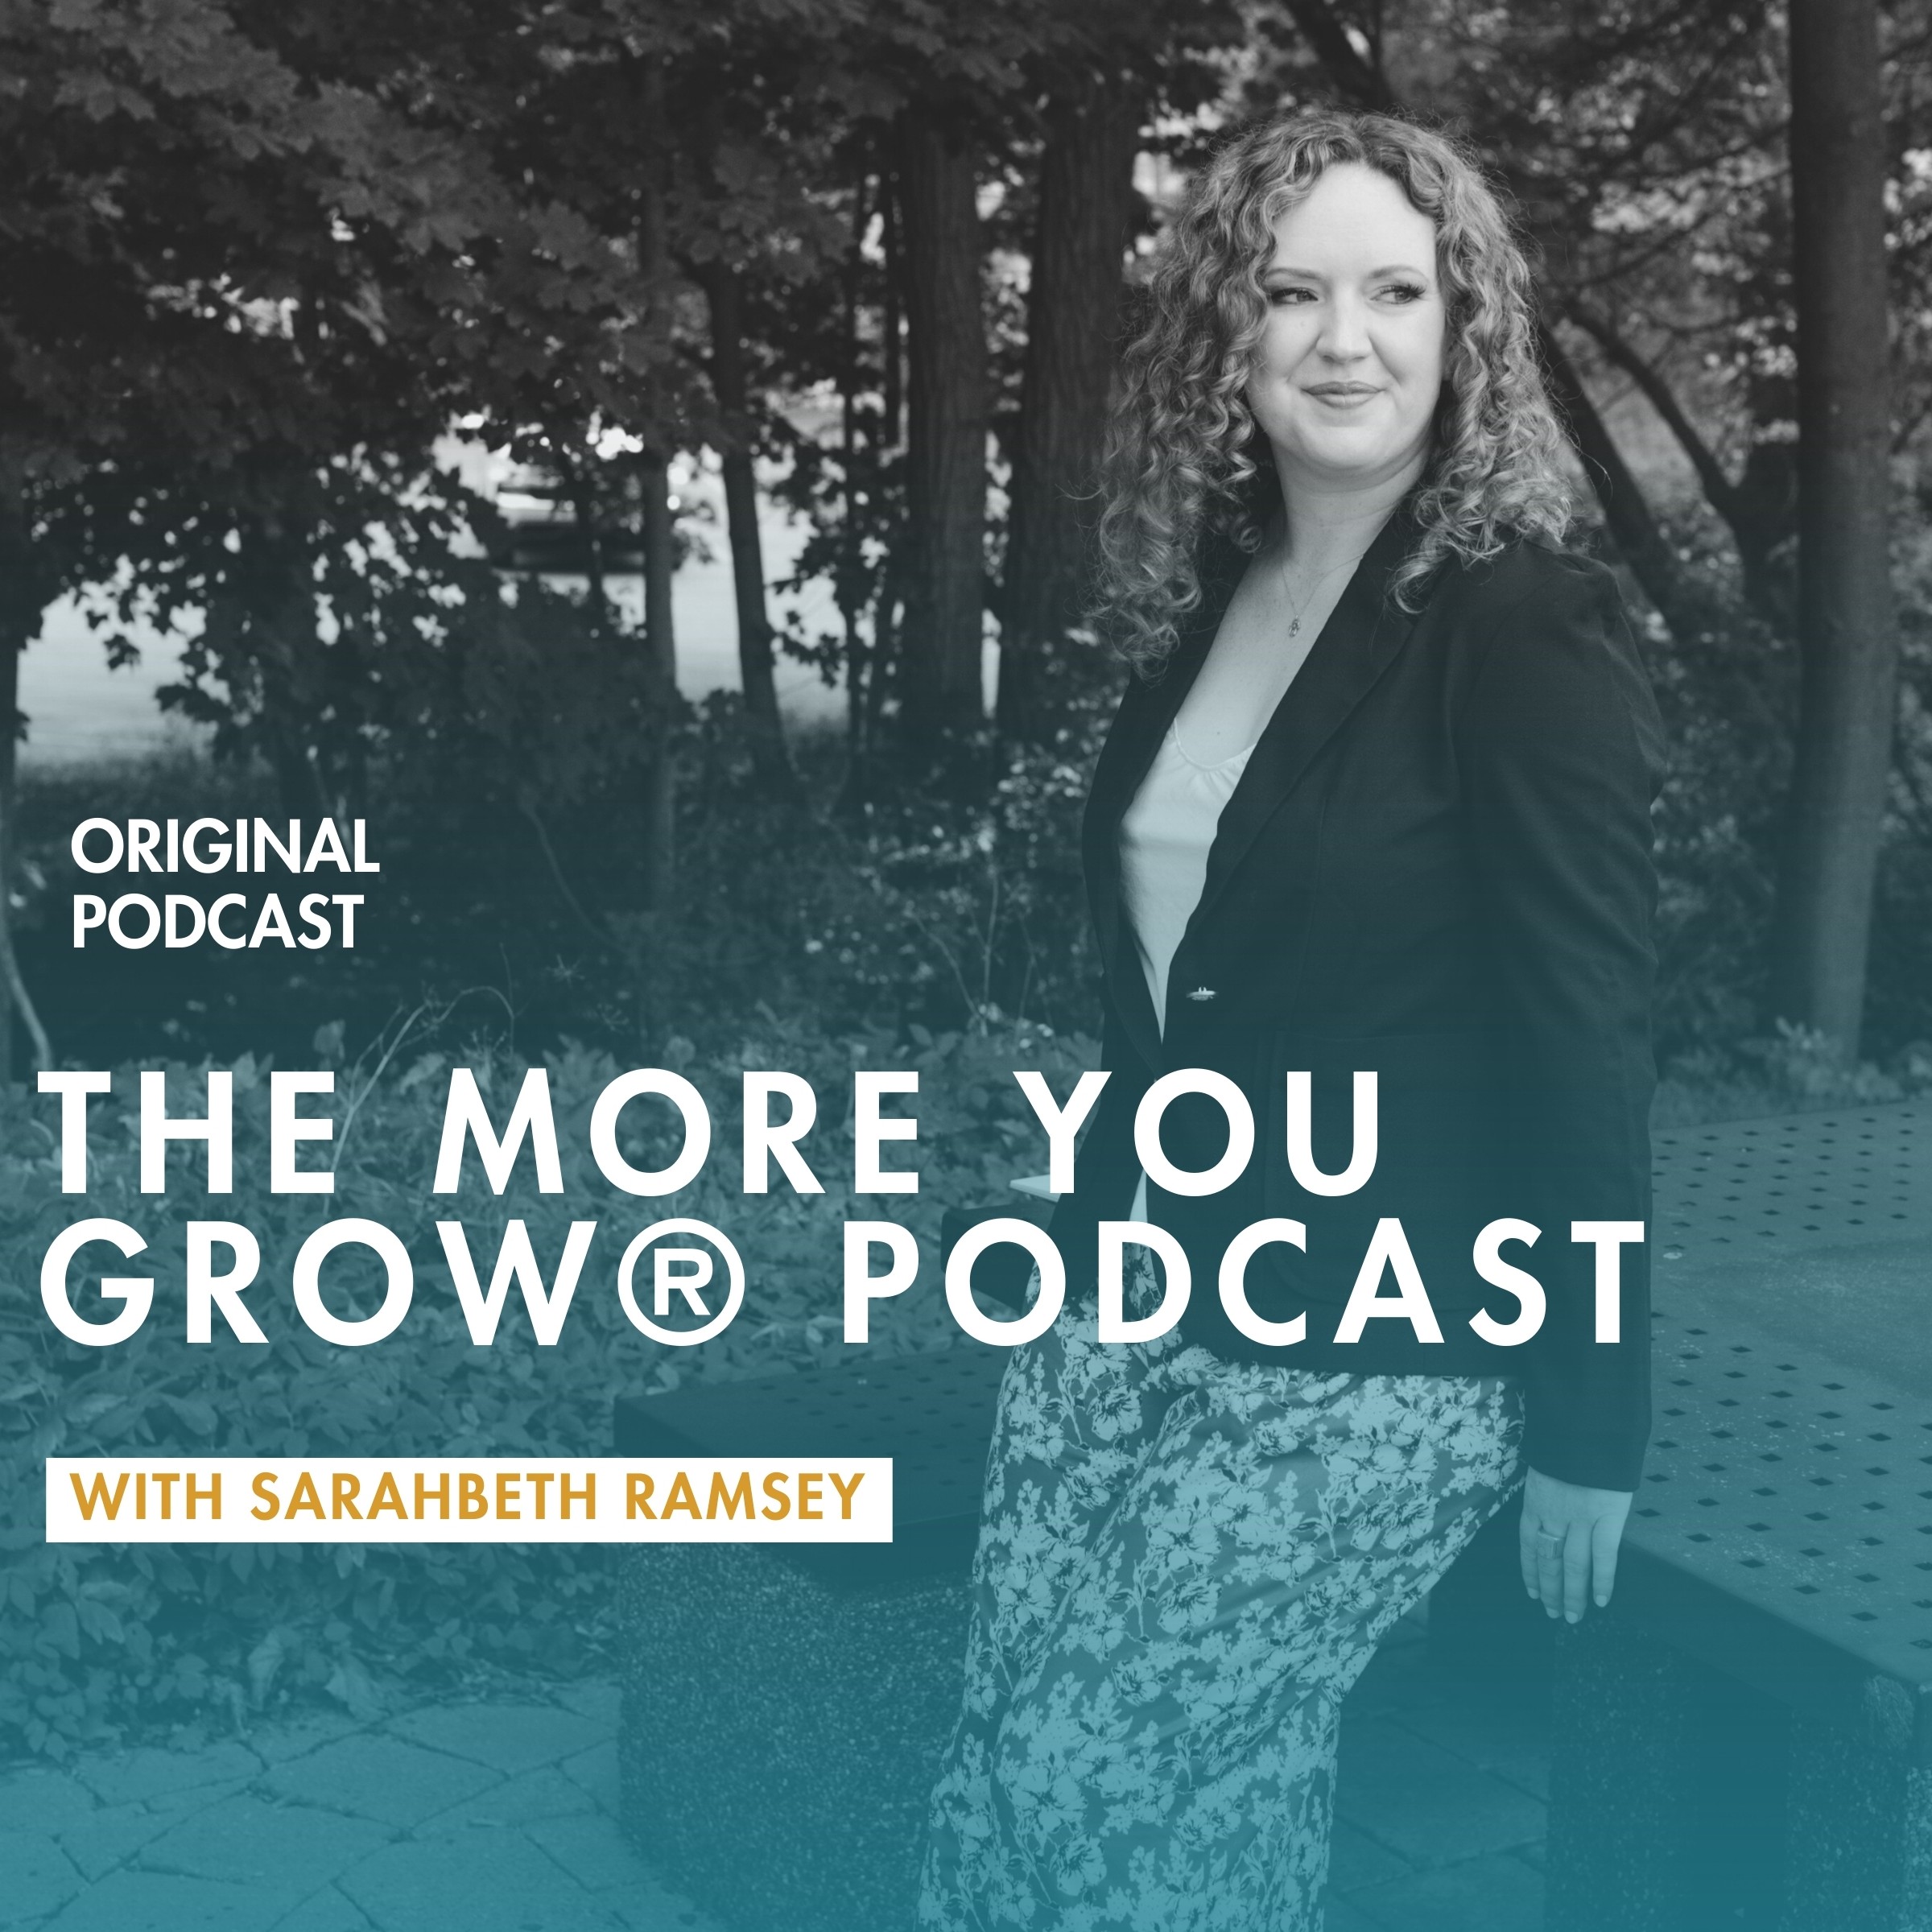 The More You Grow® Podcast